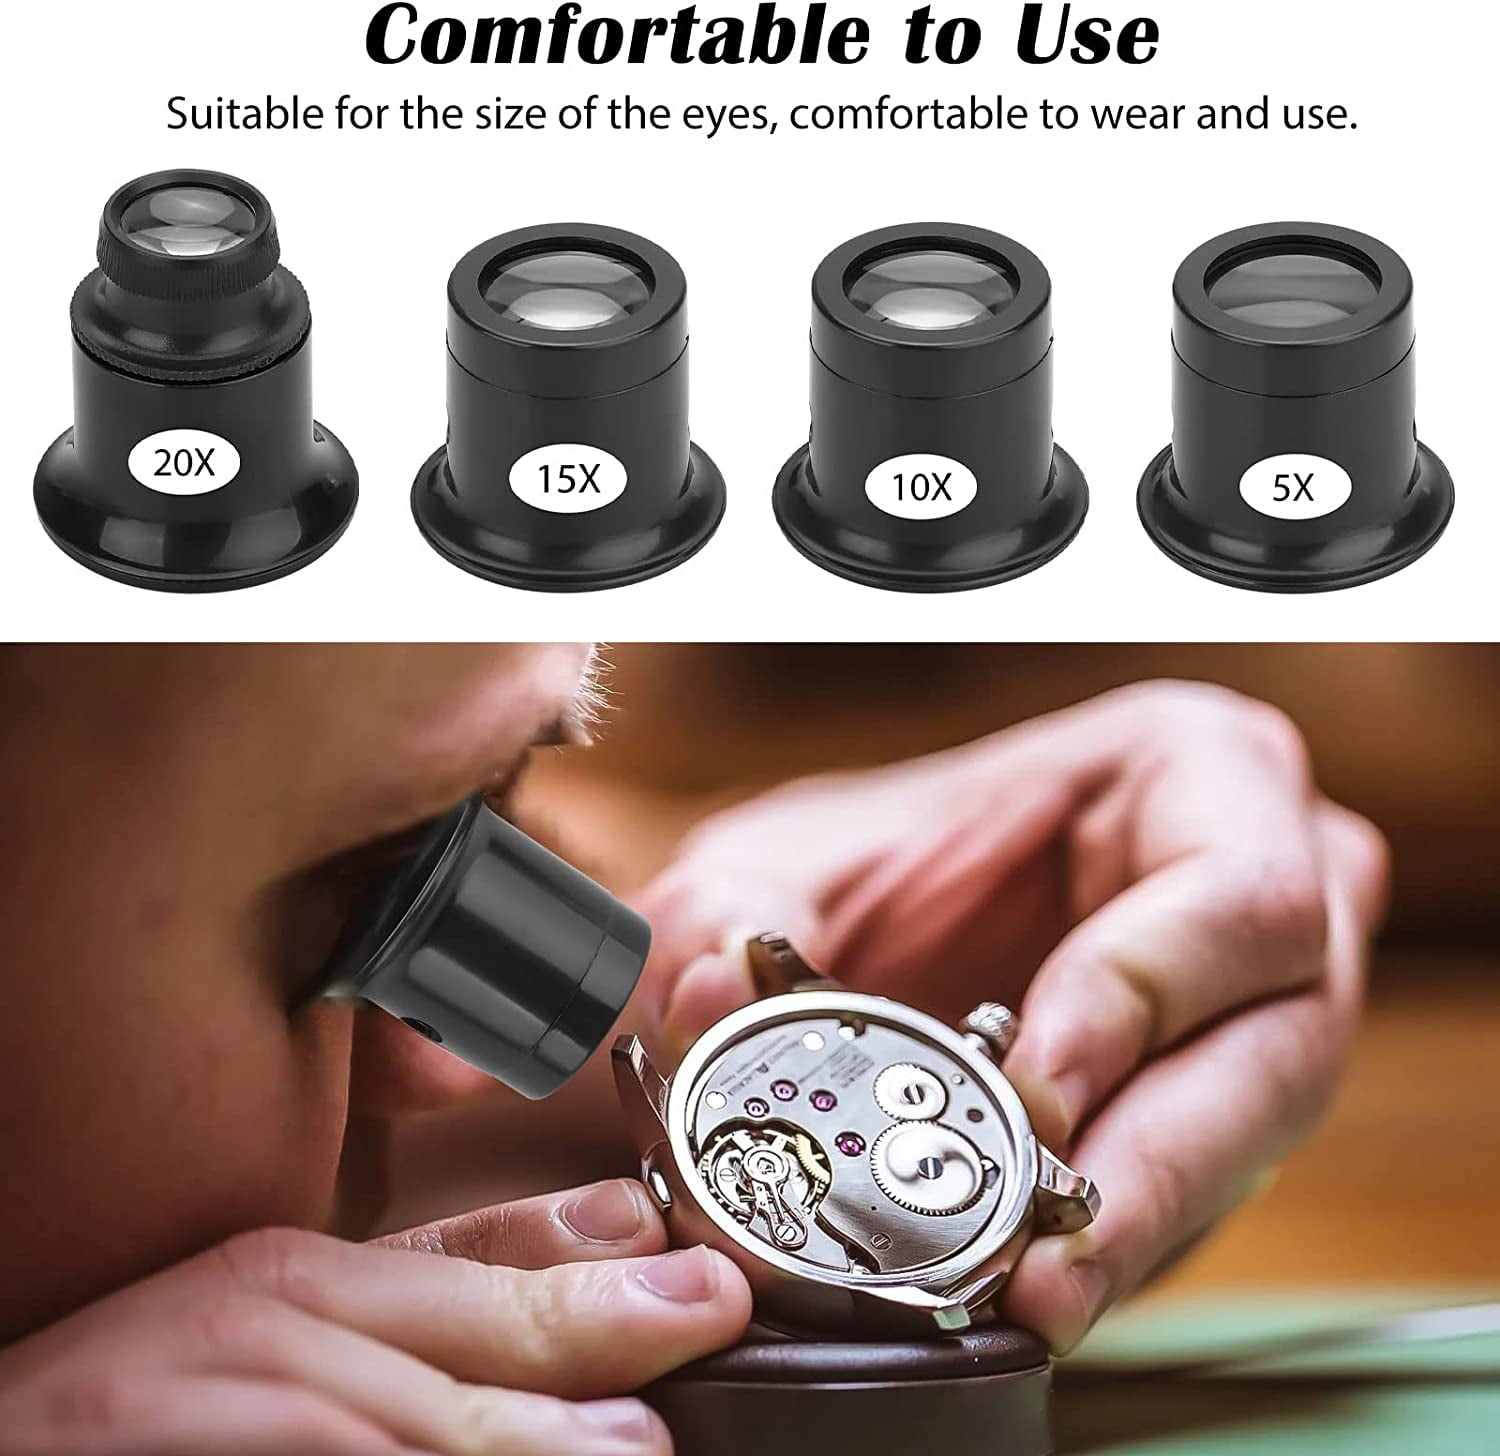  Home-organizer Tech 5X Illuminated Jewelers Loupe, LED Coin  Magnifier with Light Scale Loupe Magnifying Glass Eye Lens for Diamonds,  Gems, Coins, Engravings : Arts, Crafts & Sewing